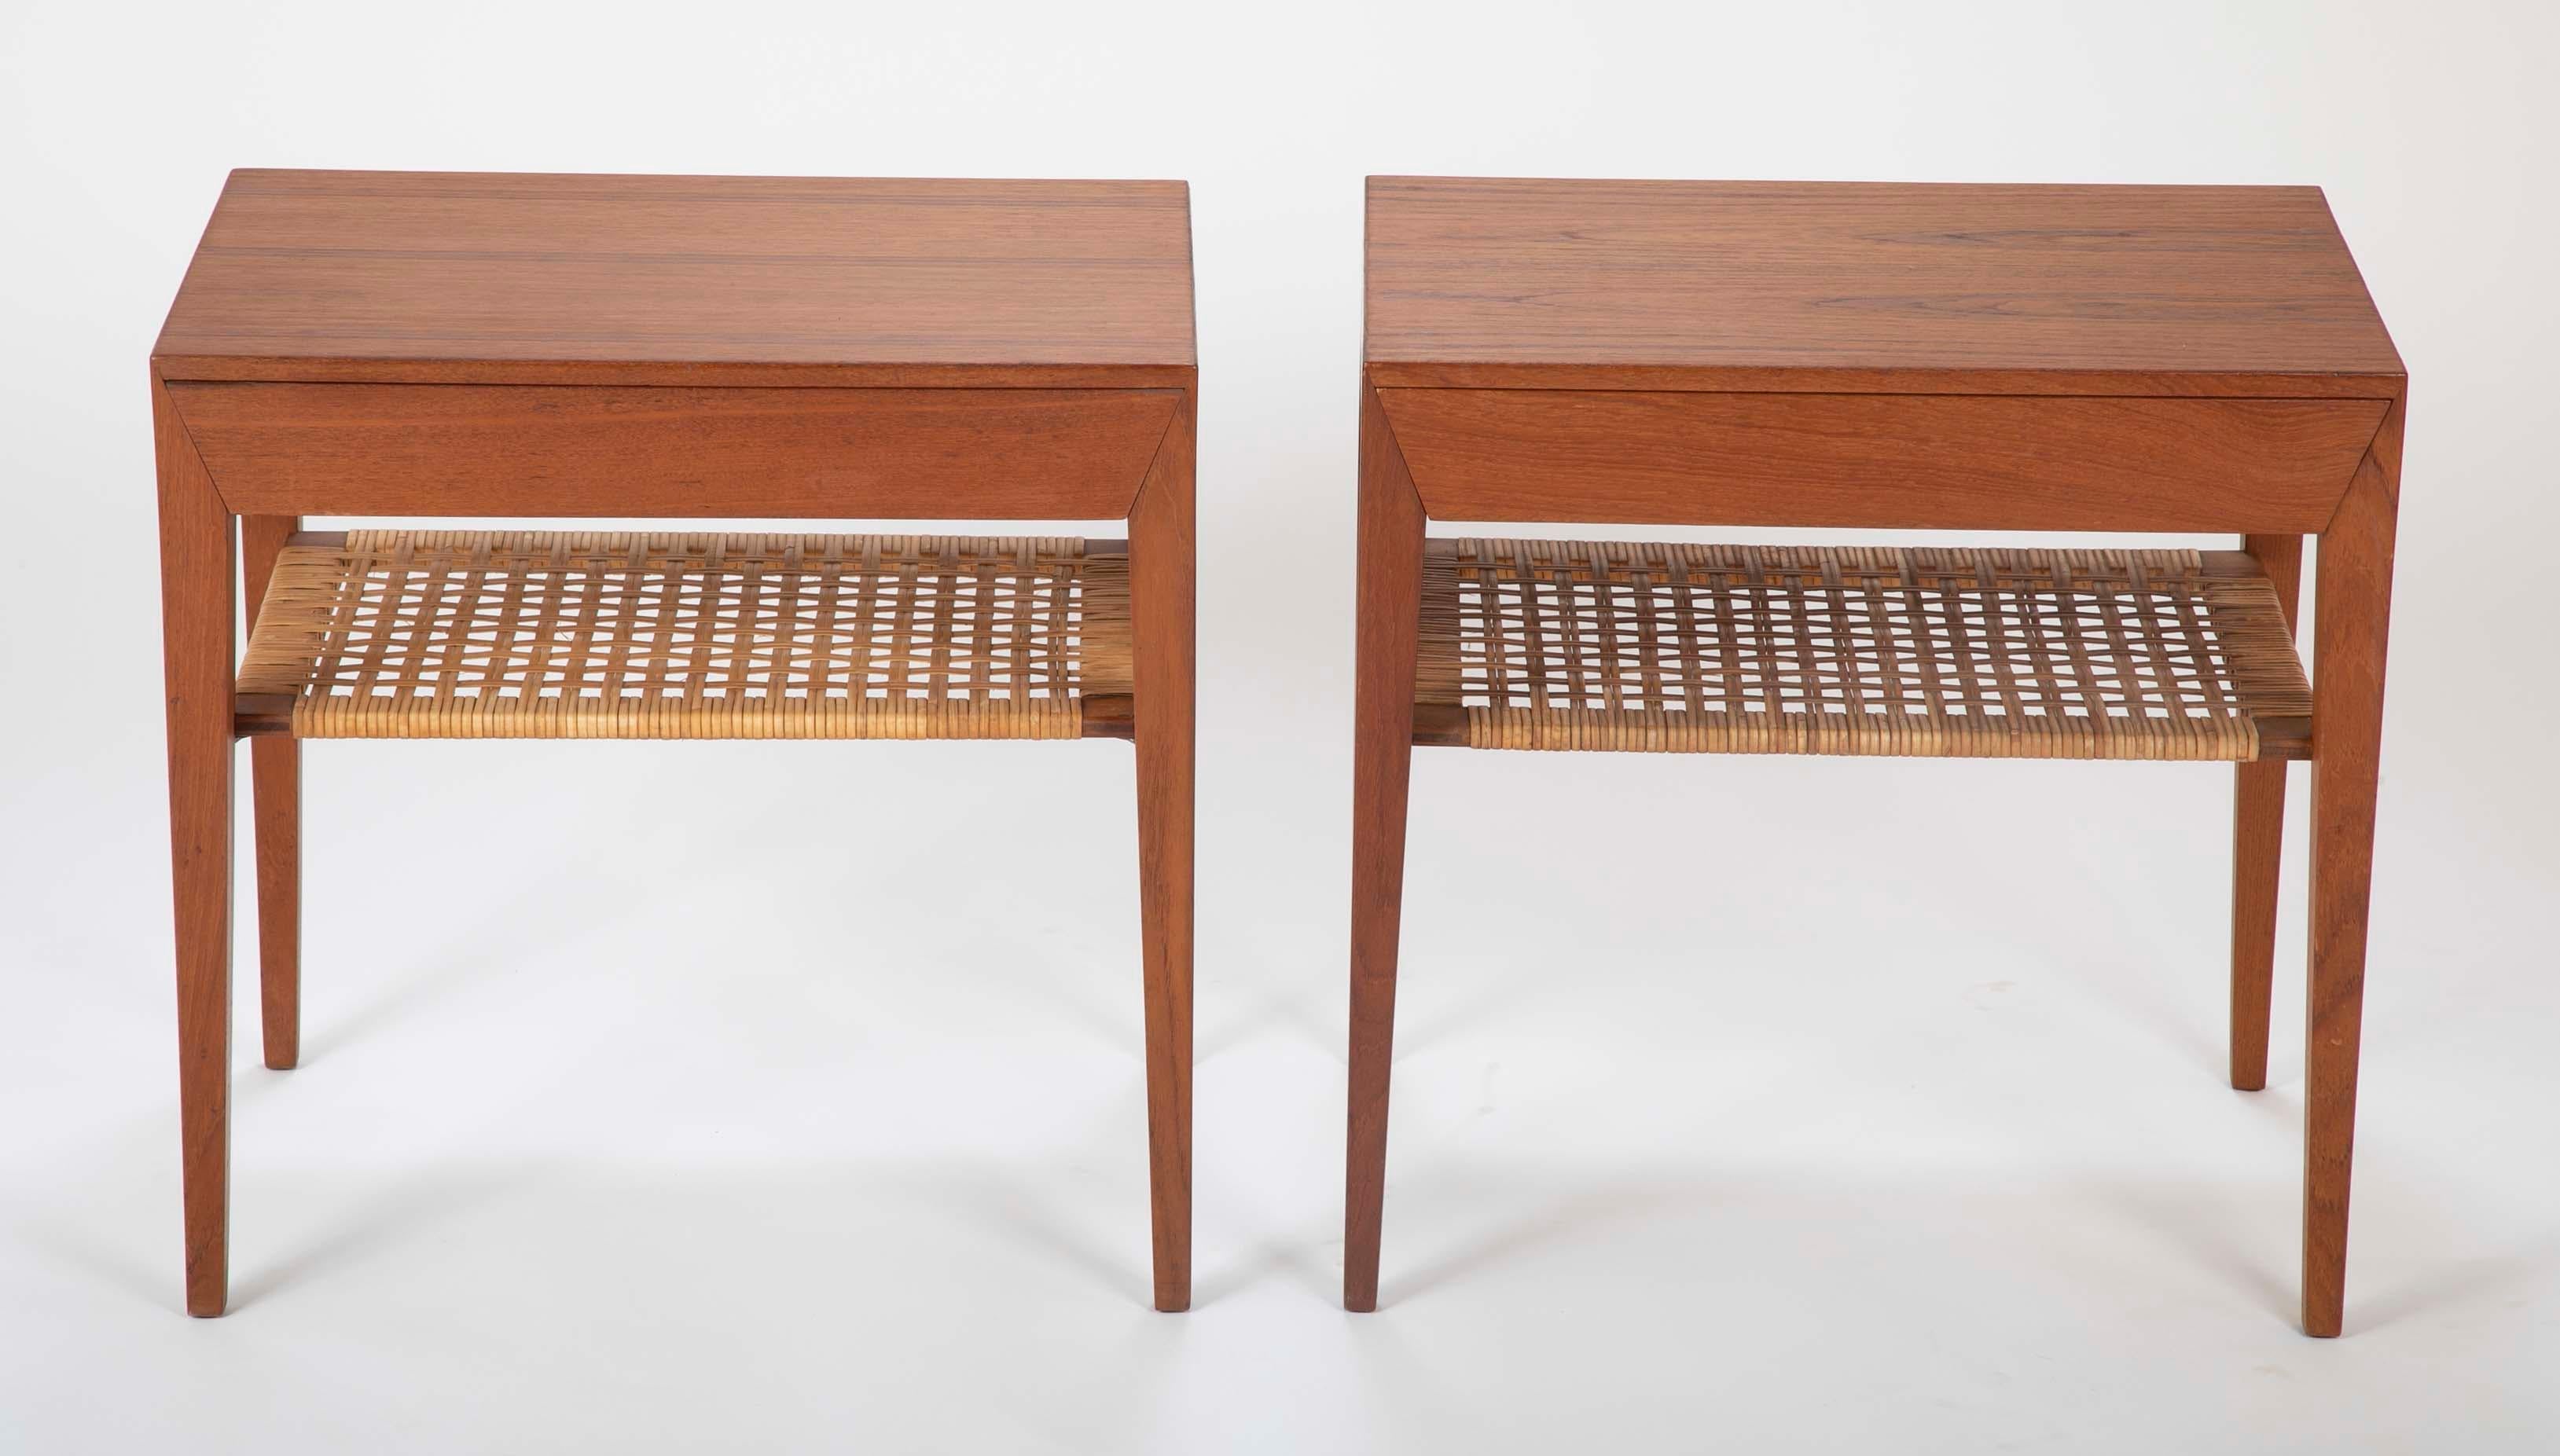 A pair of teak side tables designed by Severin Hansen Jr. with rush caned shelf and a single drawer. Produced by Haslev Møbelsnedkeri. One with Haslev & Danish control labels, the other without labels.